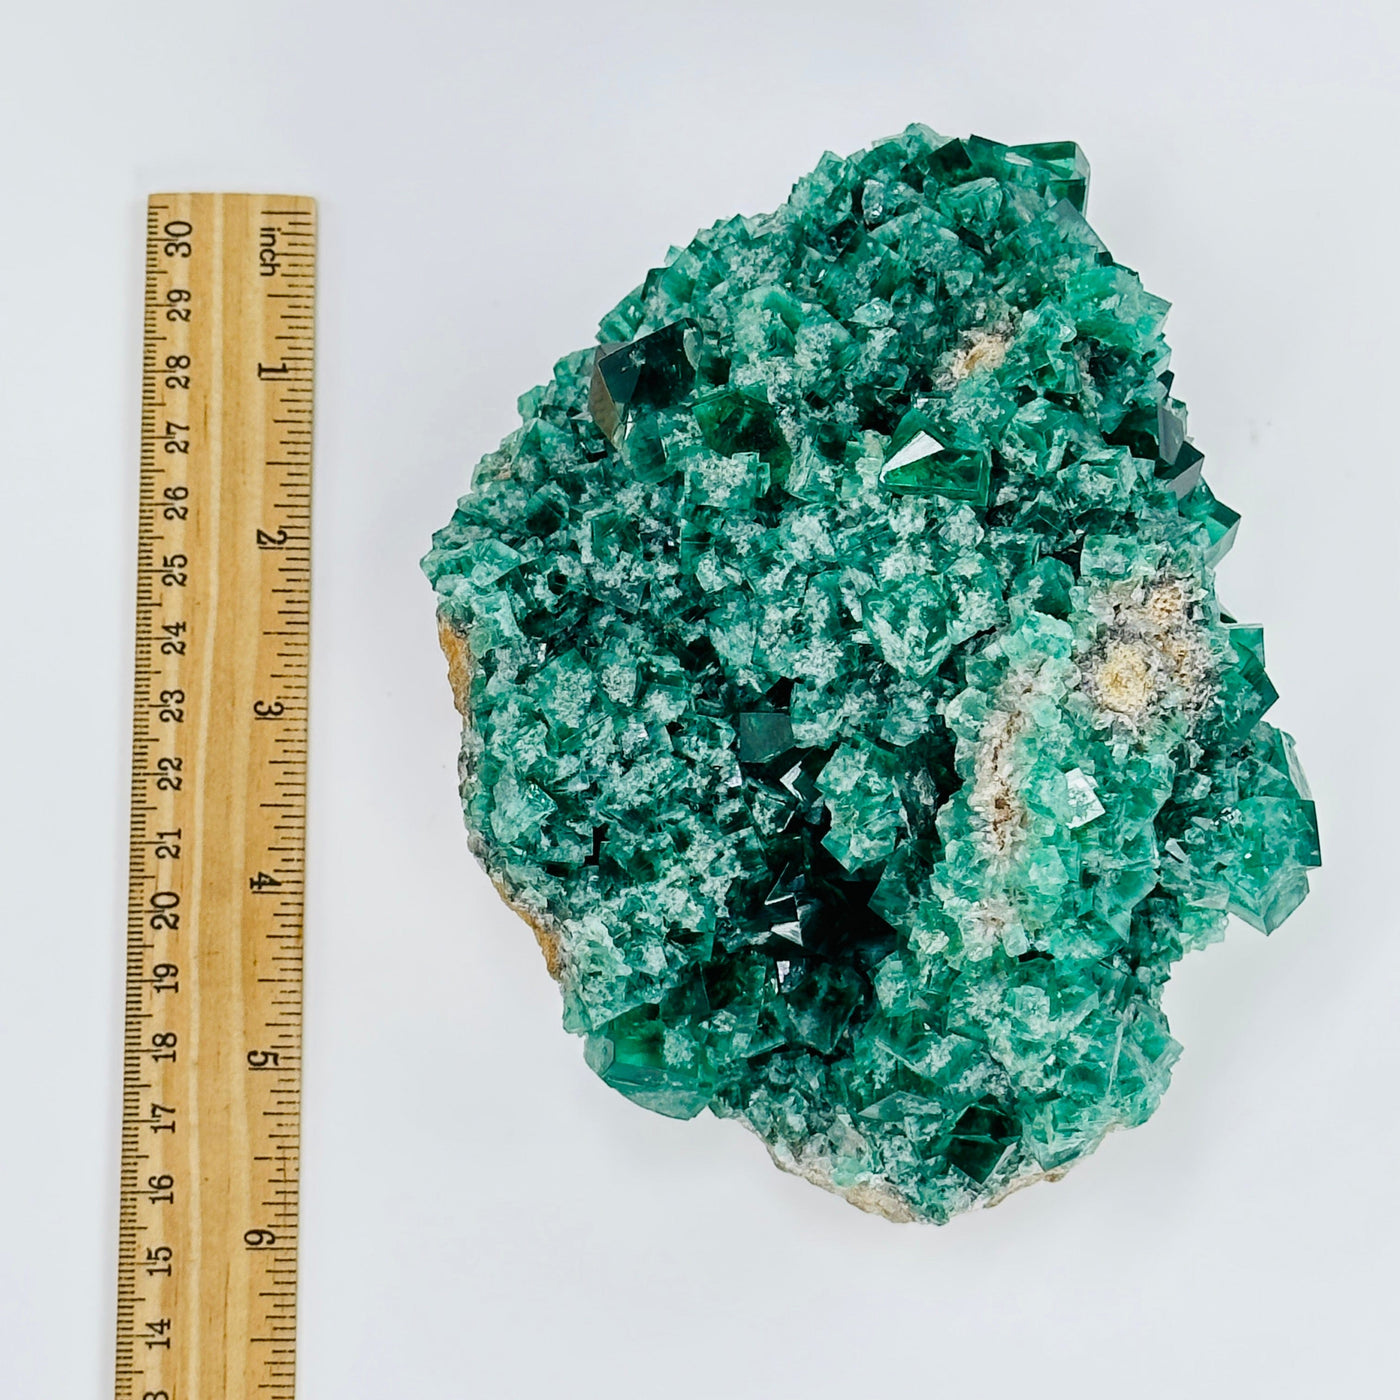 fluorite formation cluster next to a ruler for size reference